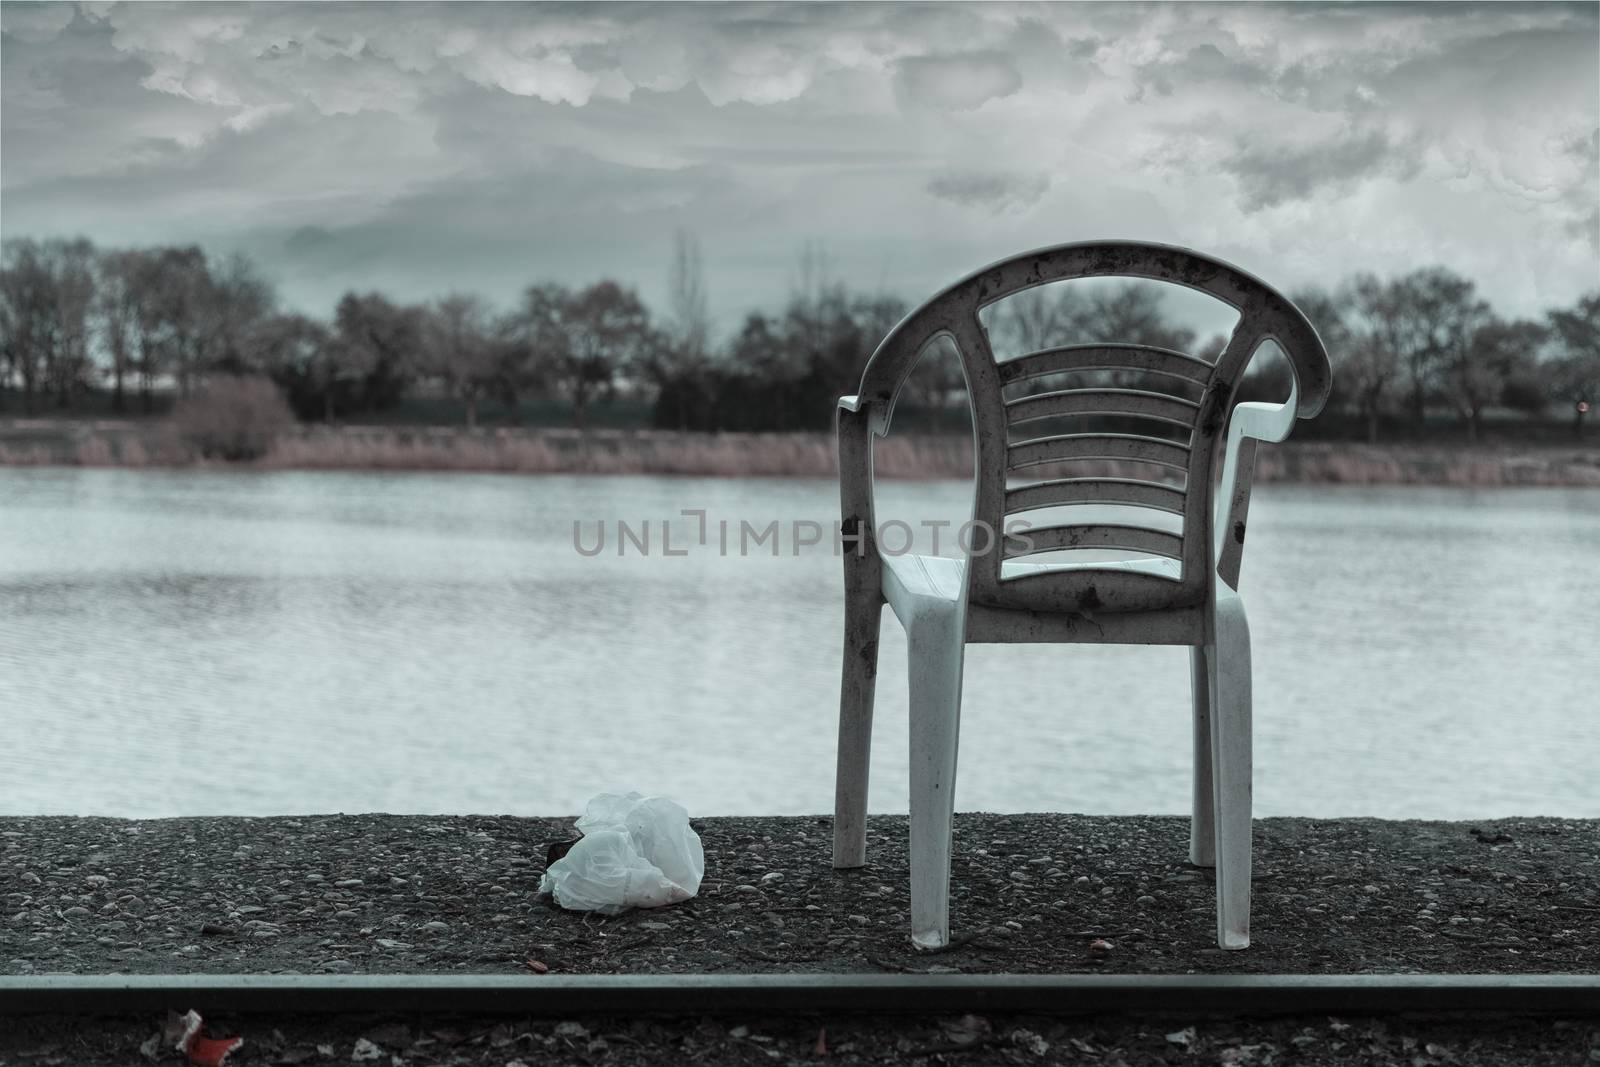 Abandoned chair in an old rail way in the river, atmosphere added.